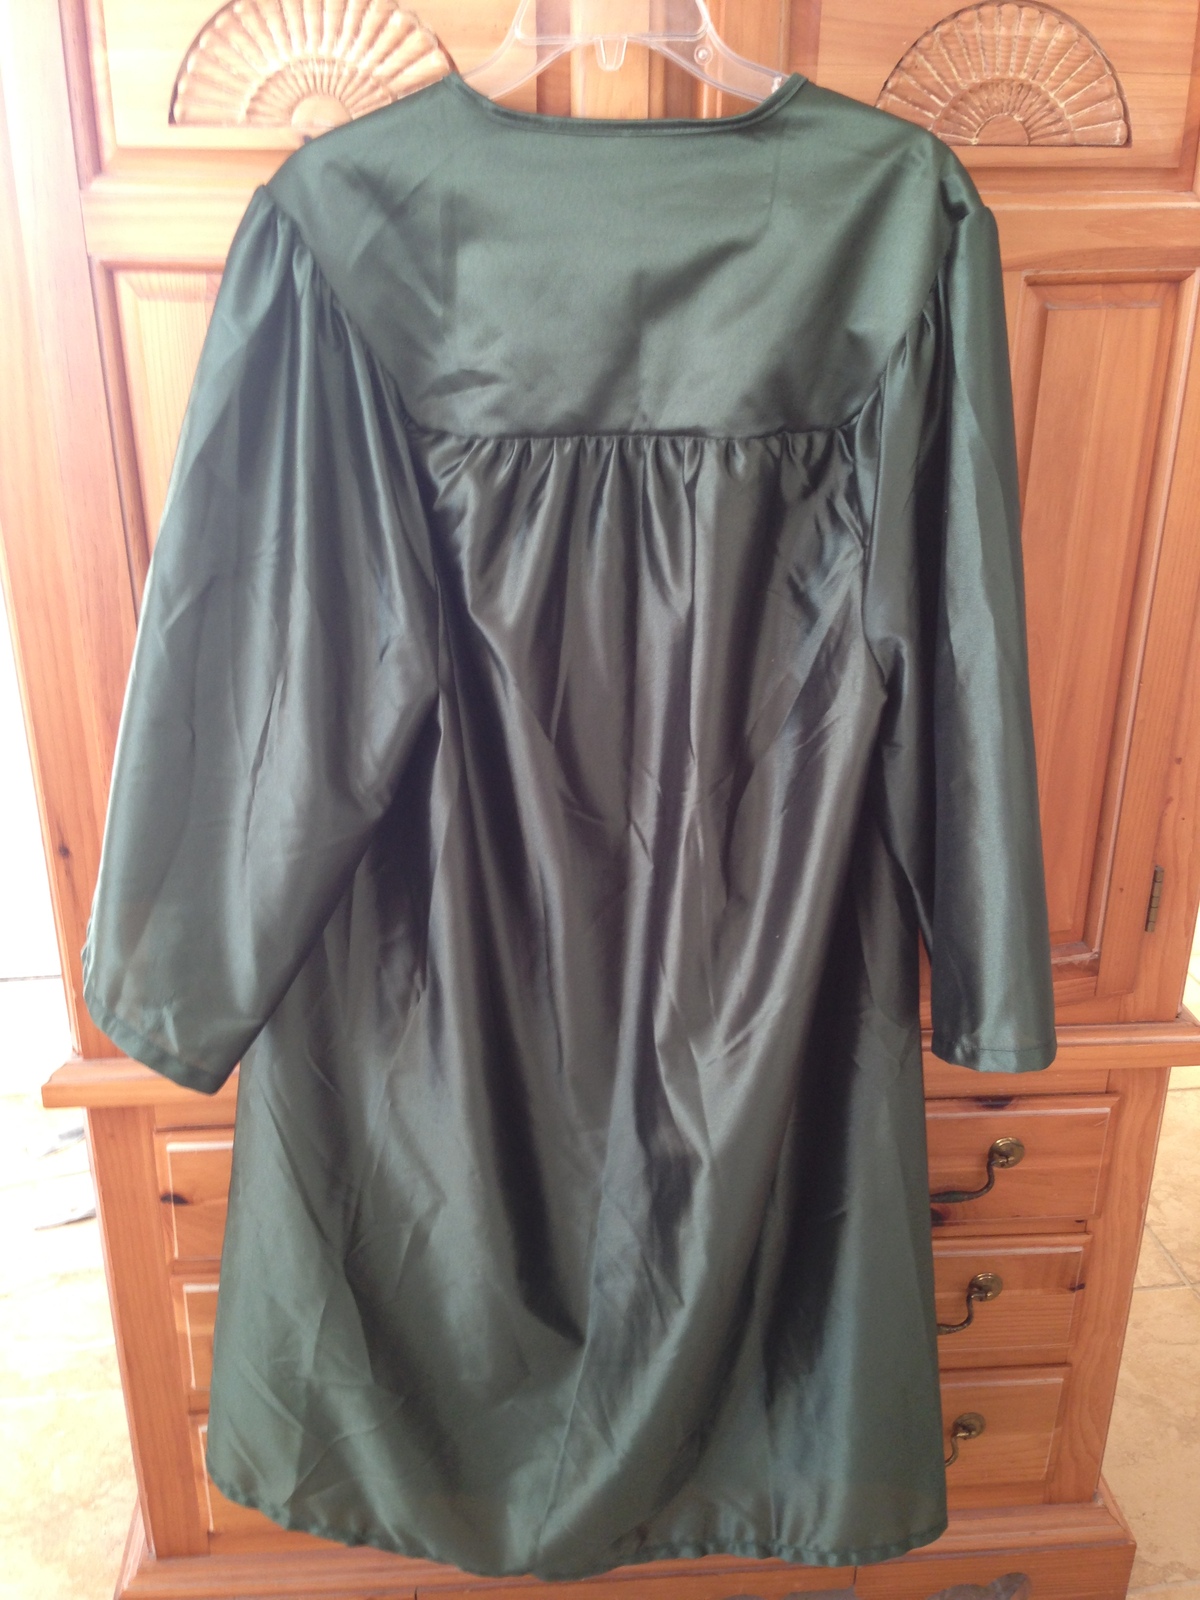 collegiate graduation gown zipper front forest green color 5'3" -5'4" by herff j - $29.99